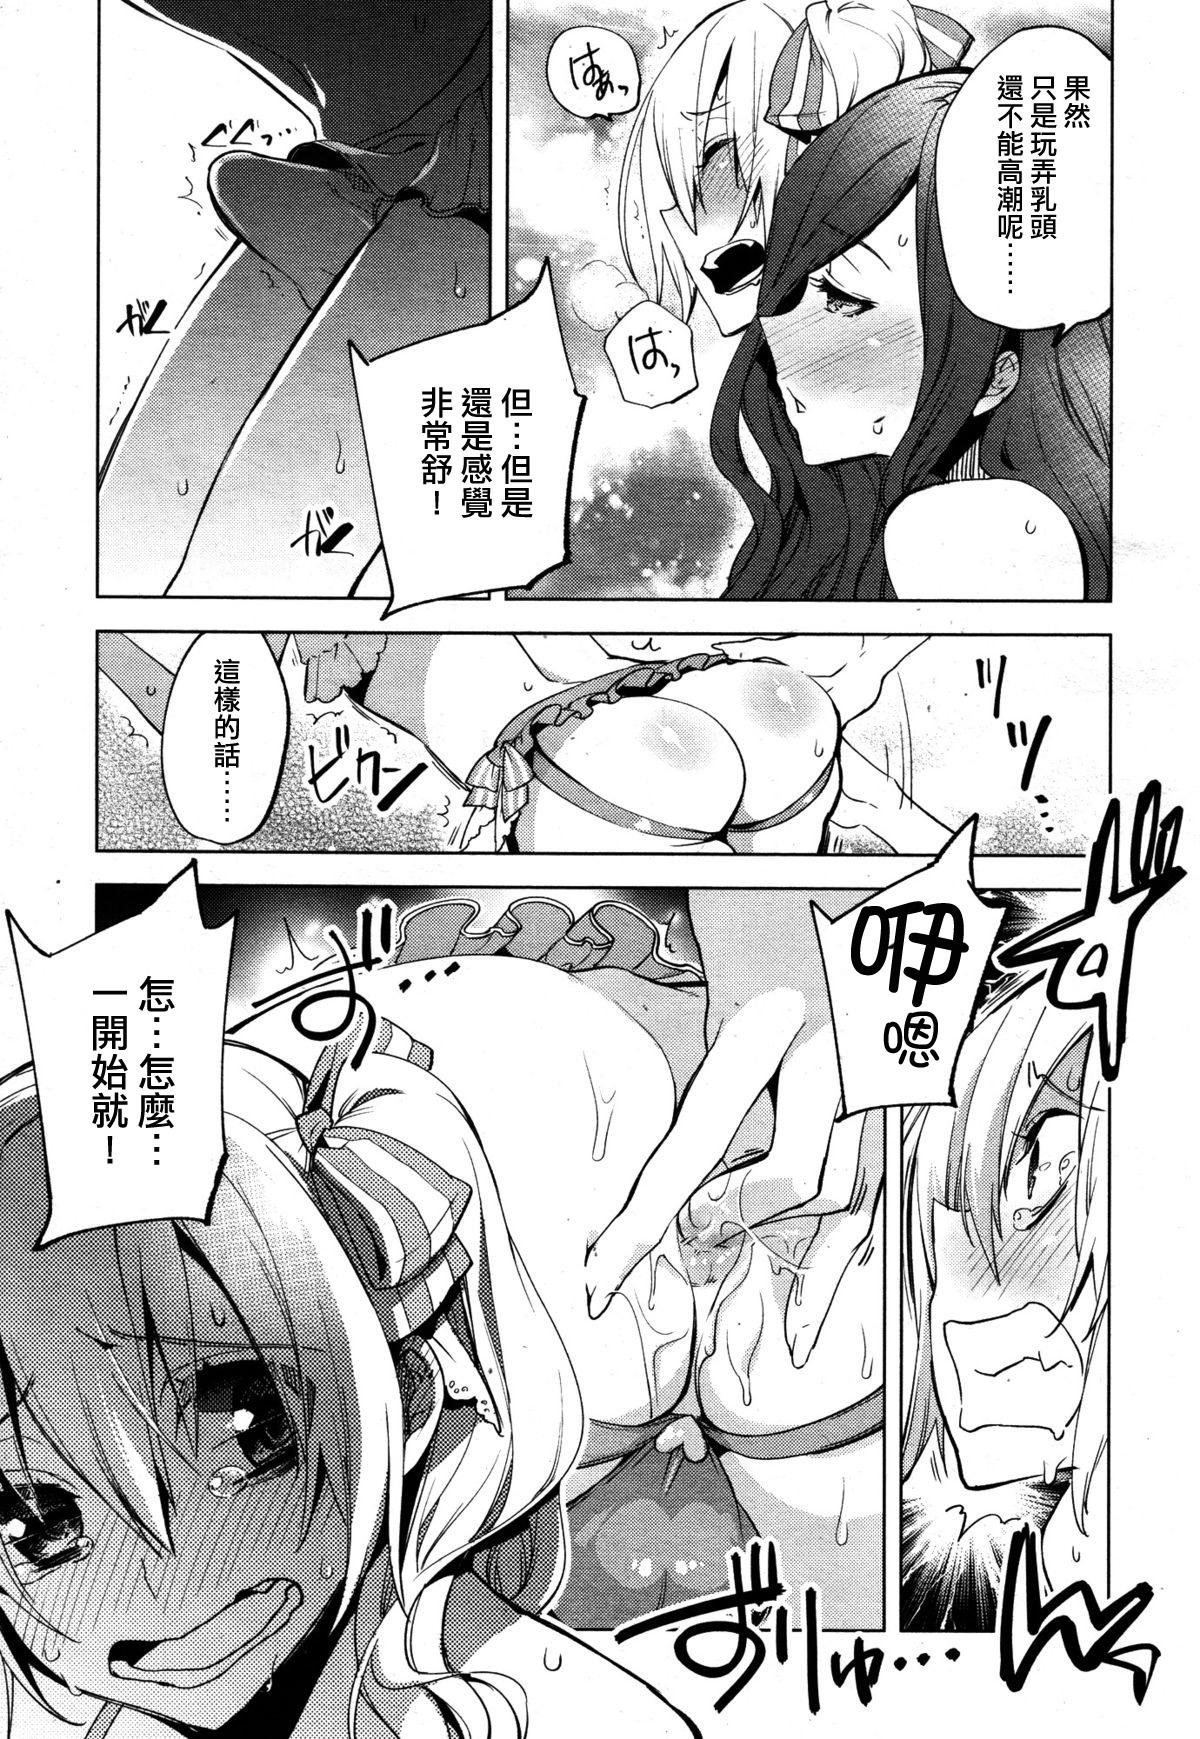 Anime Magical Insence Vol. 02 Lesbian Sex - Page 11